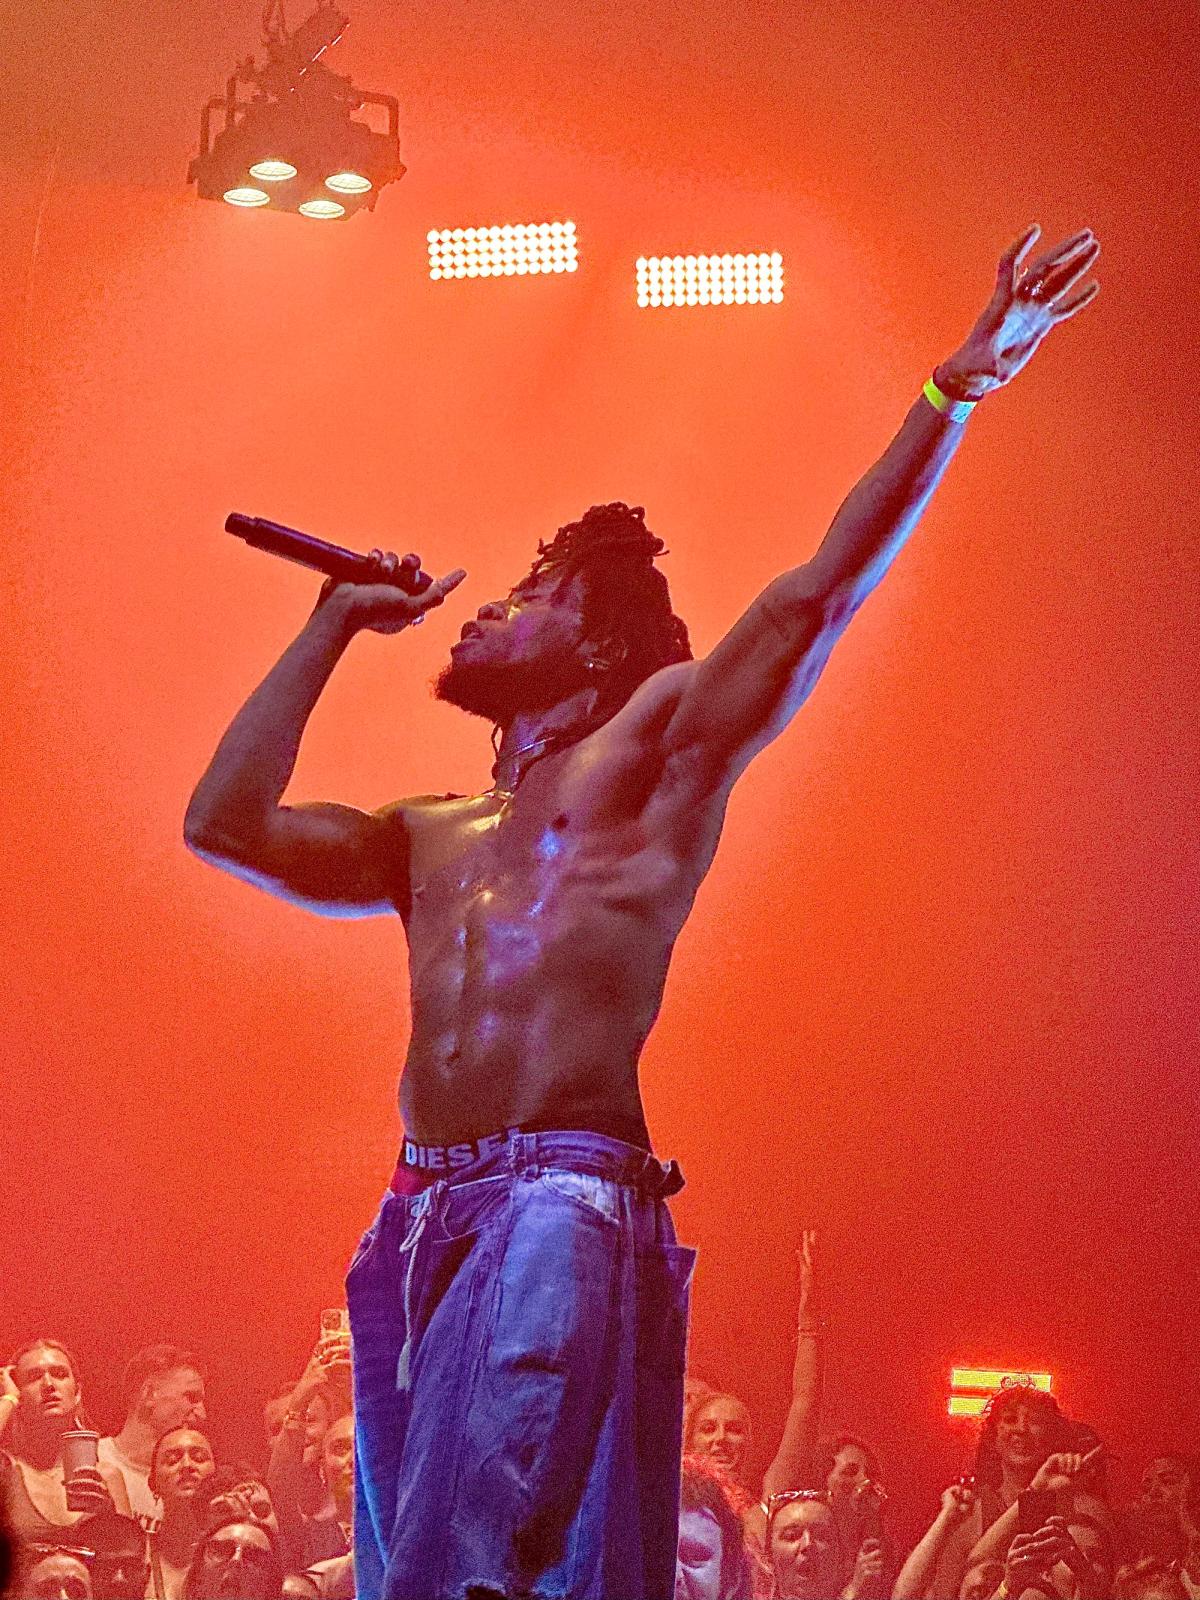 A shirtless singer performs on stage against a red backdrop.